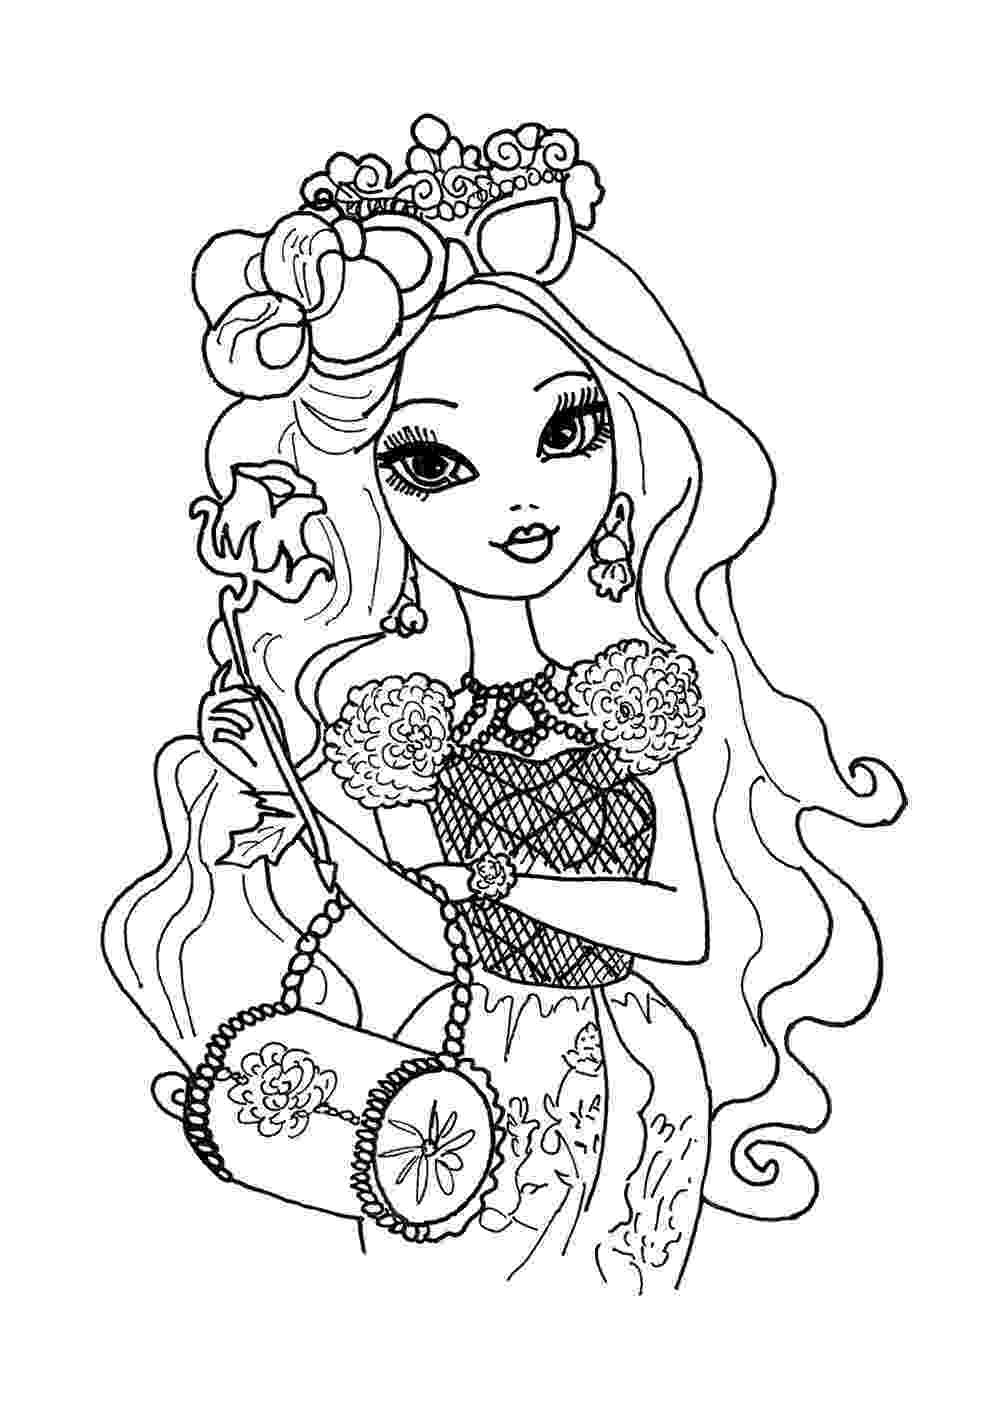 coloringpages free printable tangled coloring pages for kids cool2bkids coloringpages 1 1